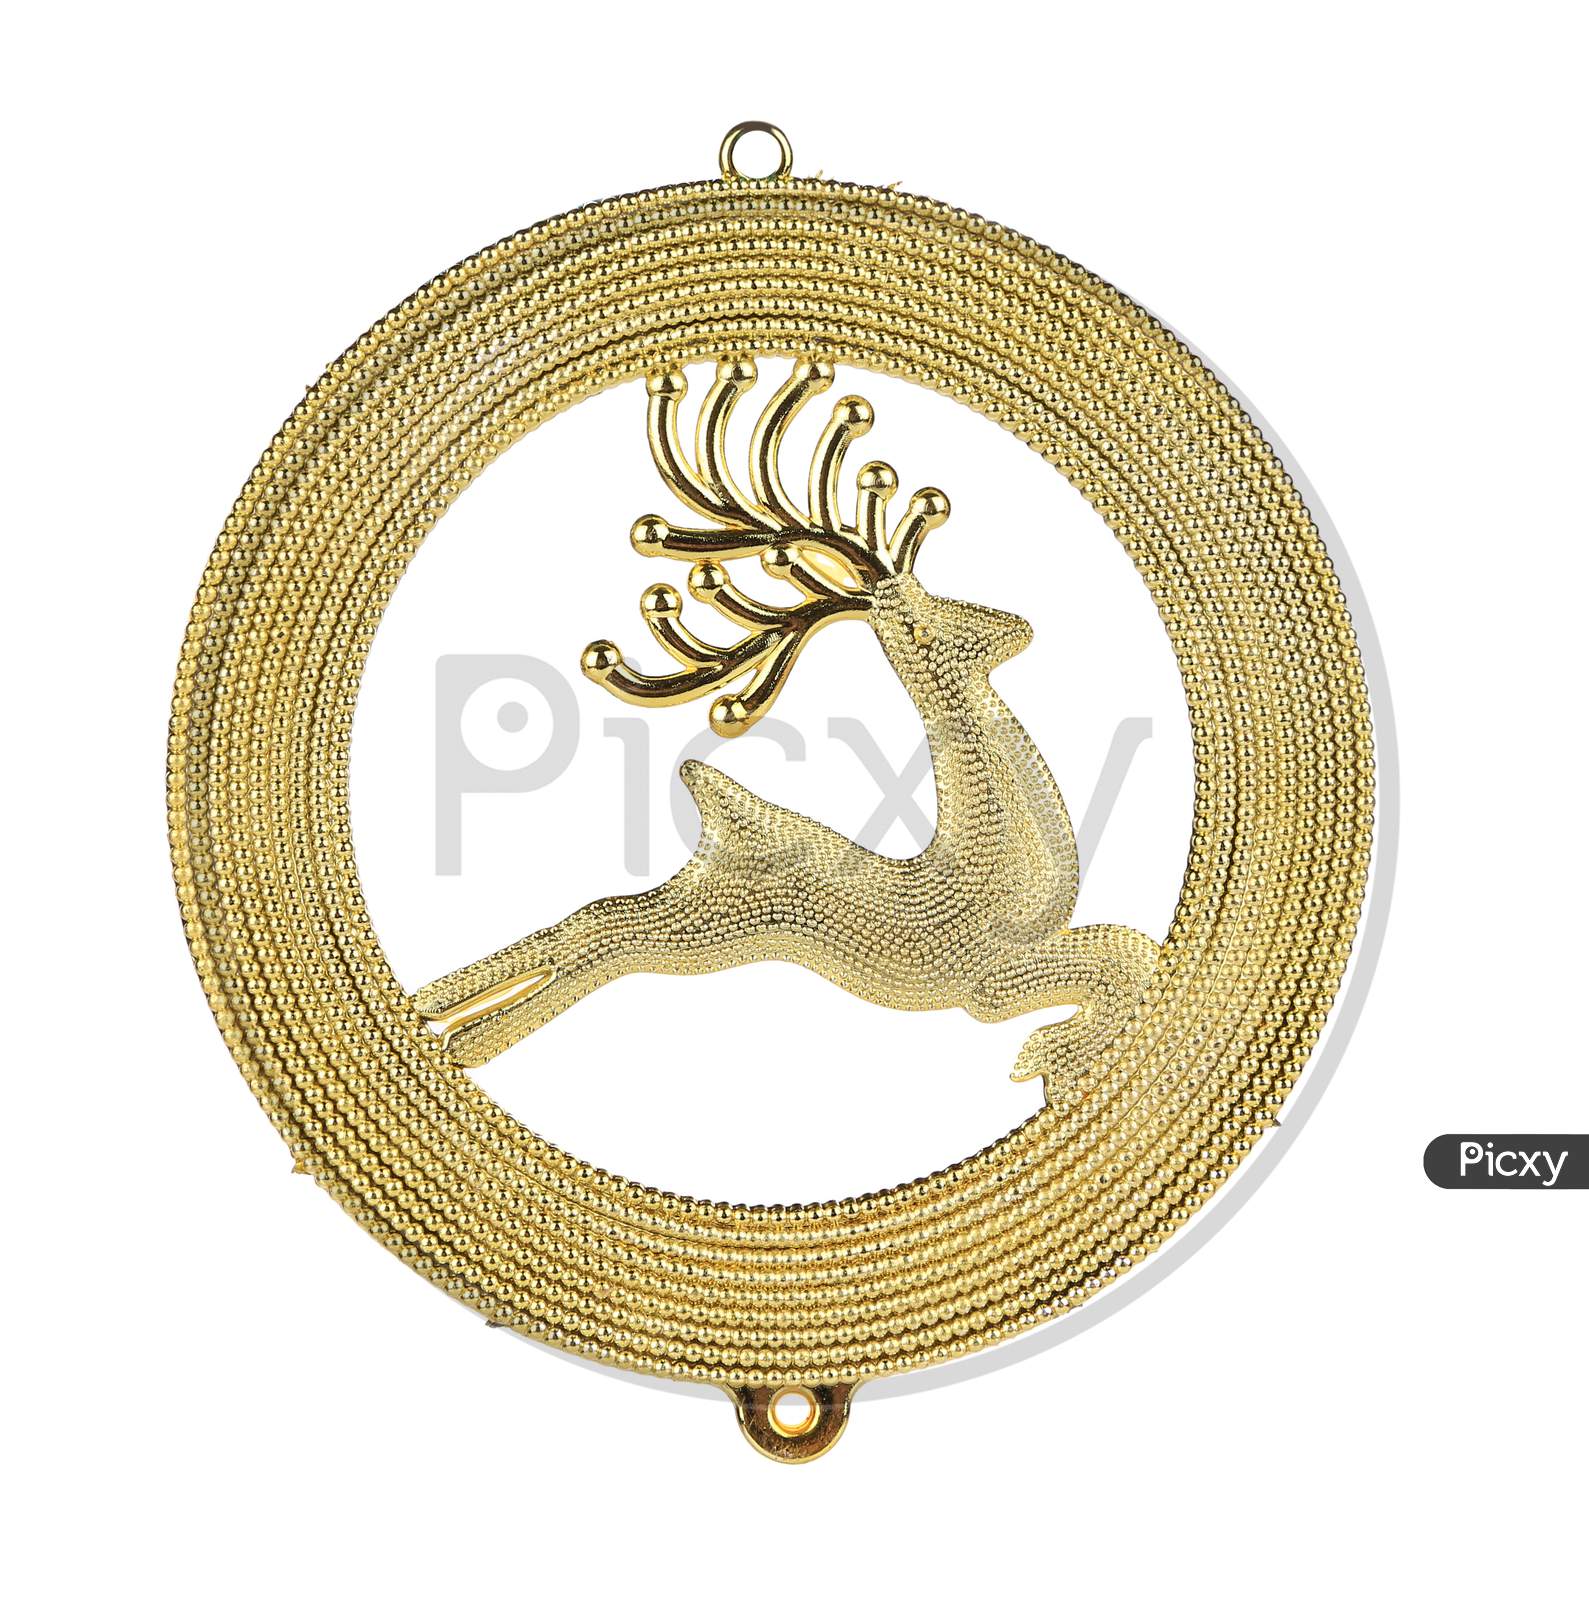 Leaping Reindeer Glitter Christmas Medal. Isolated On A White Background.